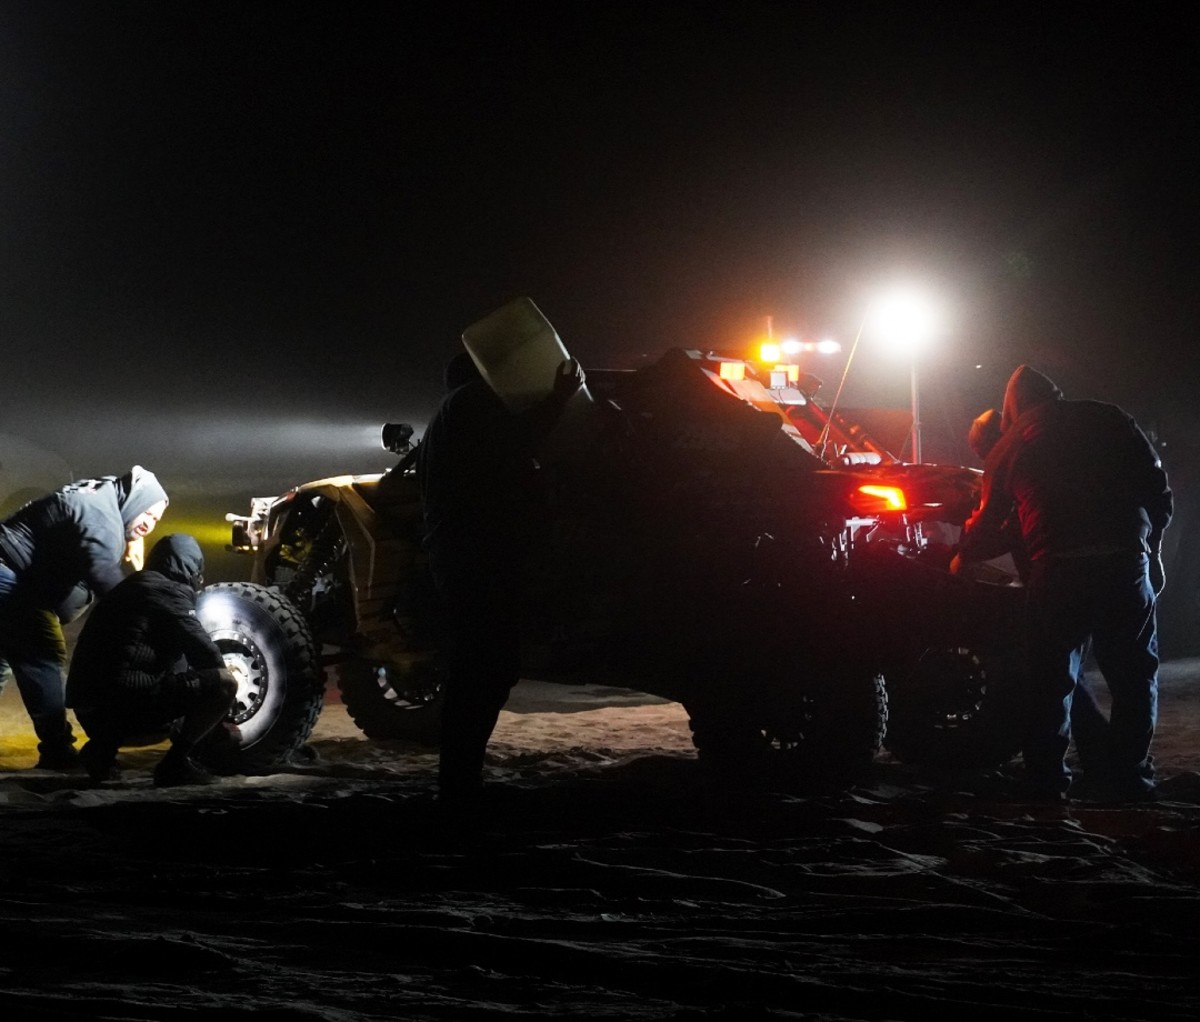 Race car mechanics surround a UTV during a pit stop at night in a desert race.